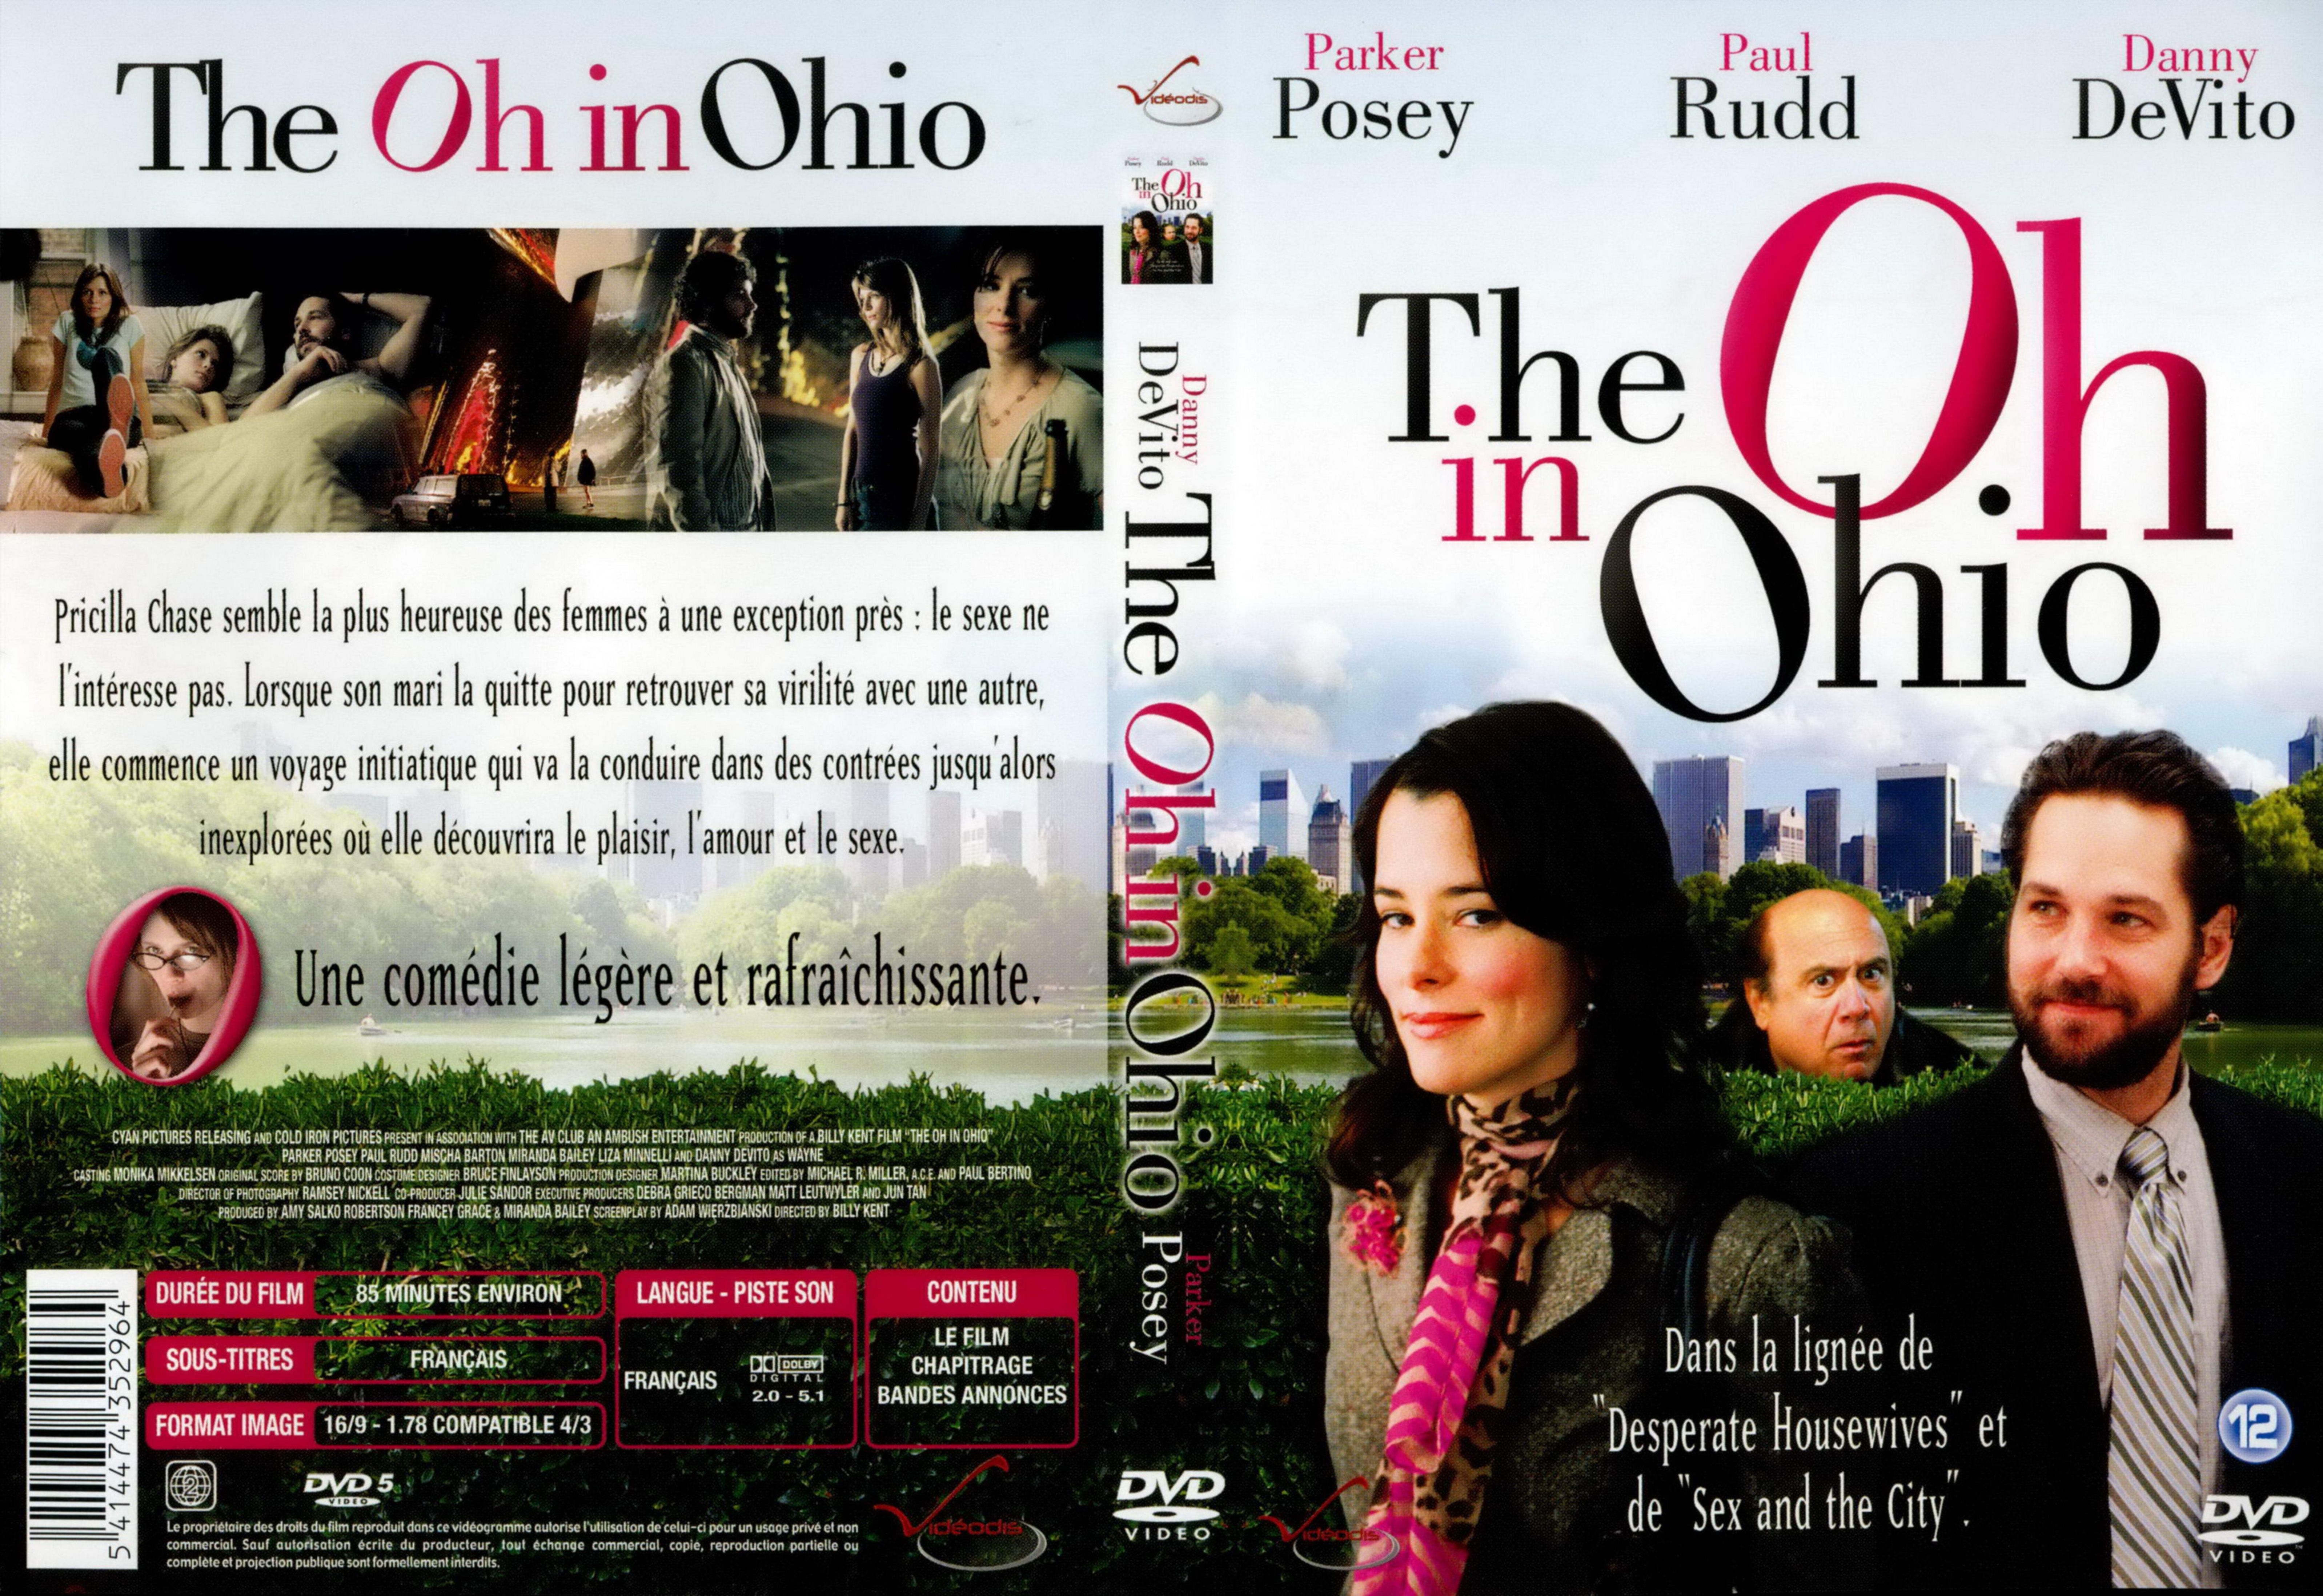 Jaquette DVD The oh in Ohio